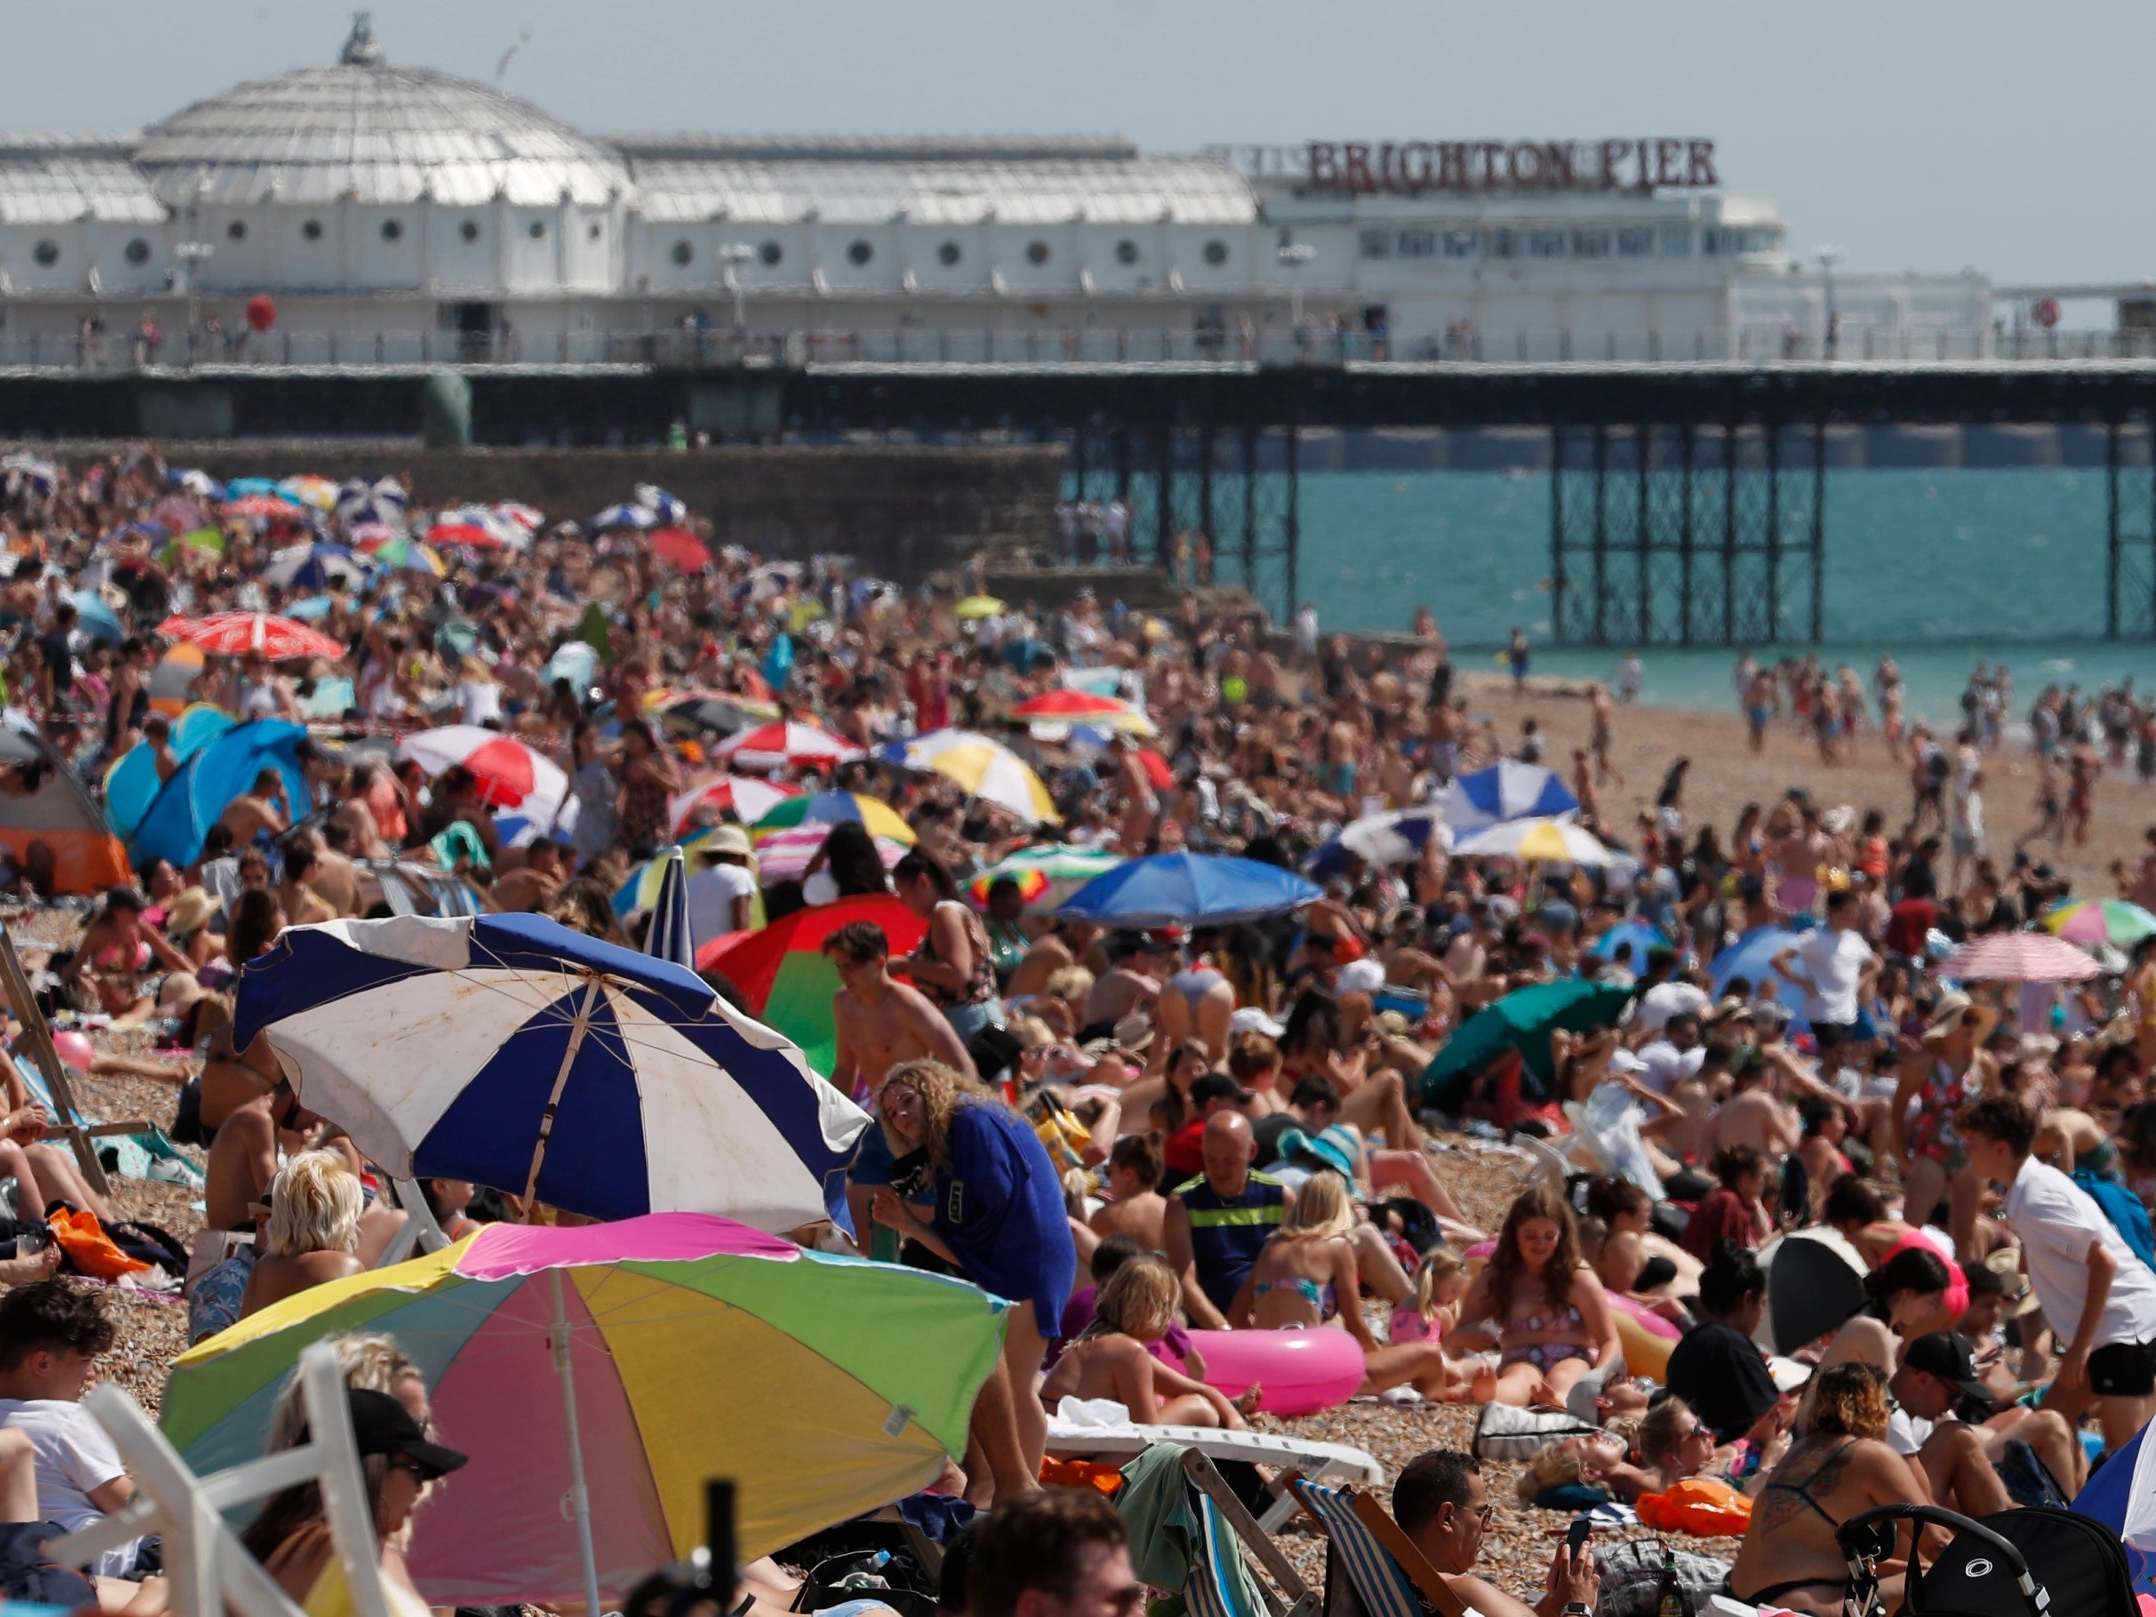 Beachgoers enjoy the sunshine and sea on what is now Britain's hottest day of the year so far, in Brighton, Friday 31 July